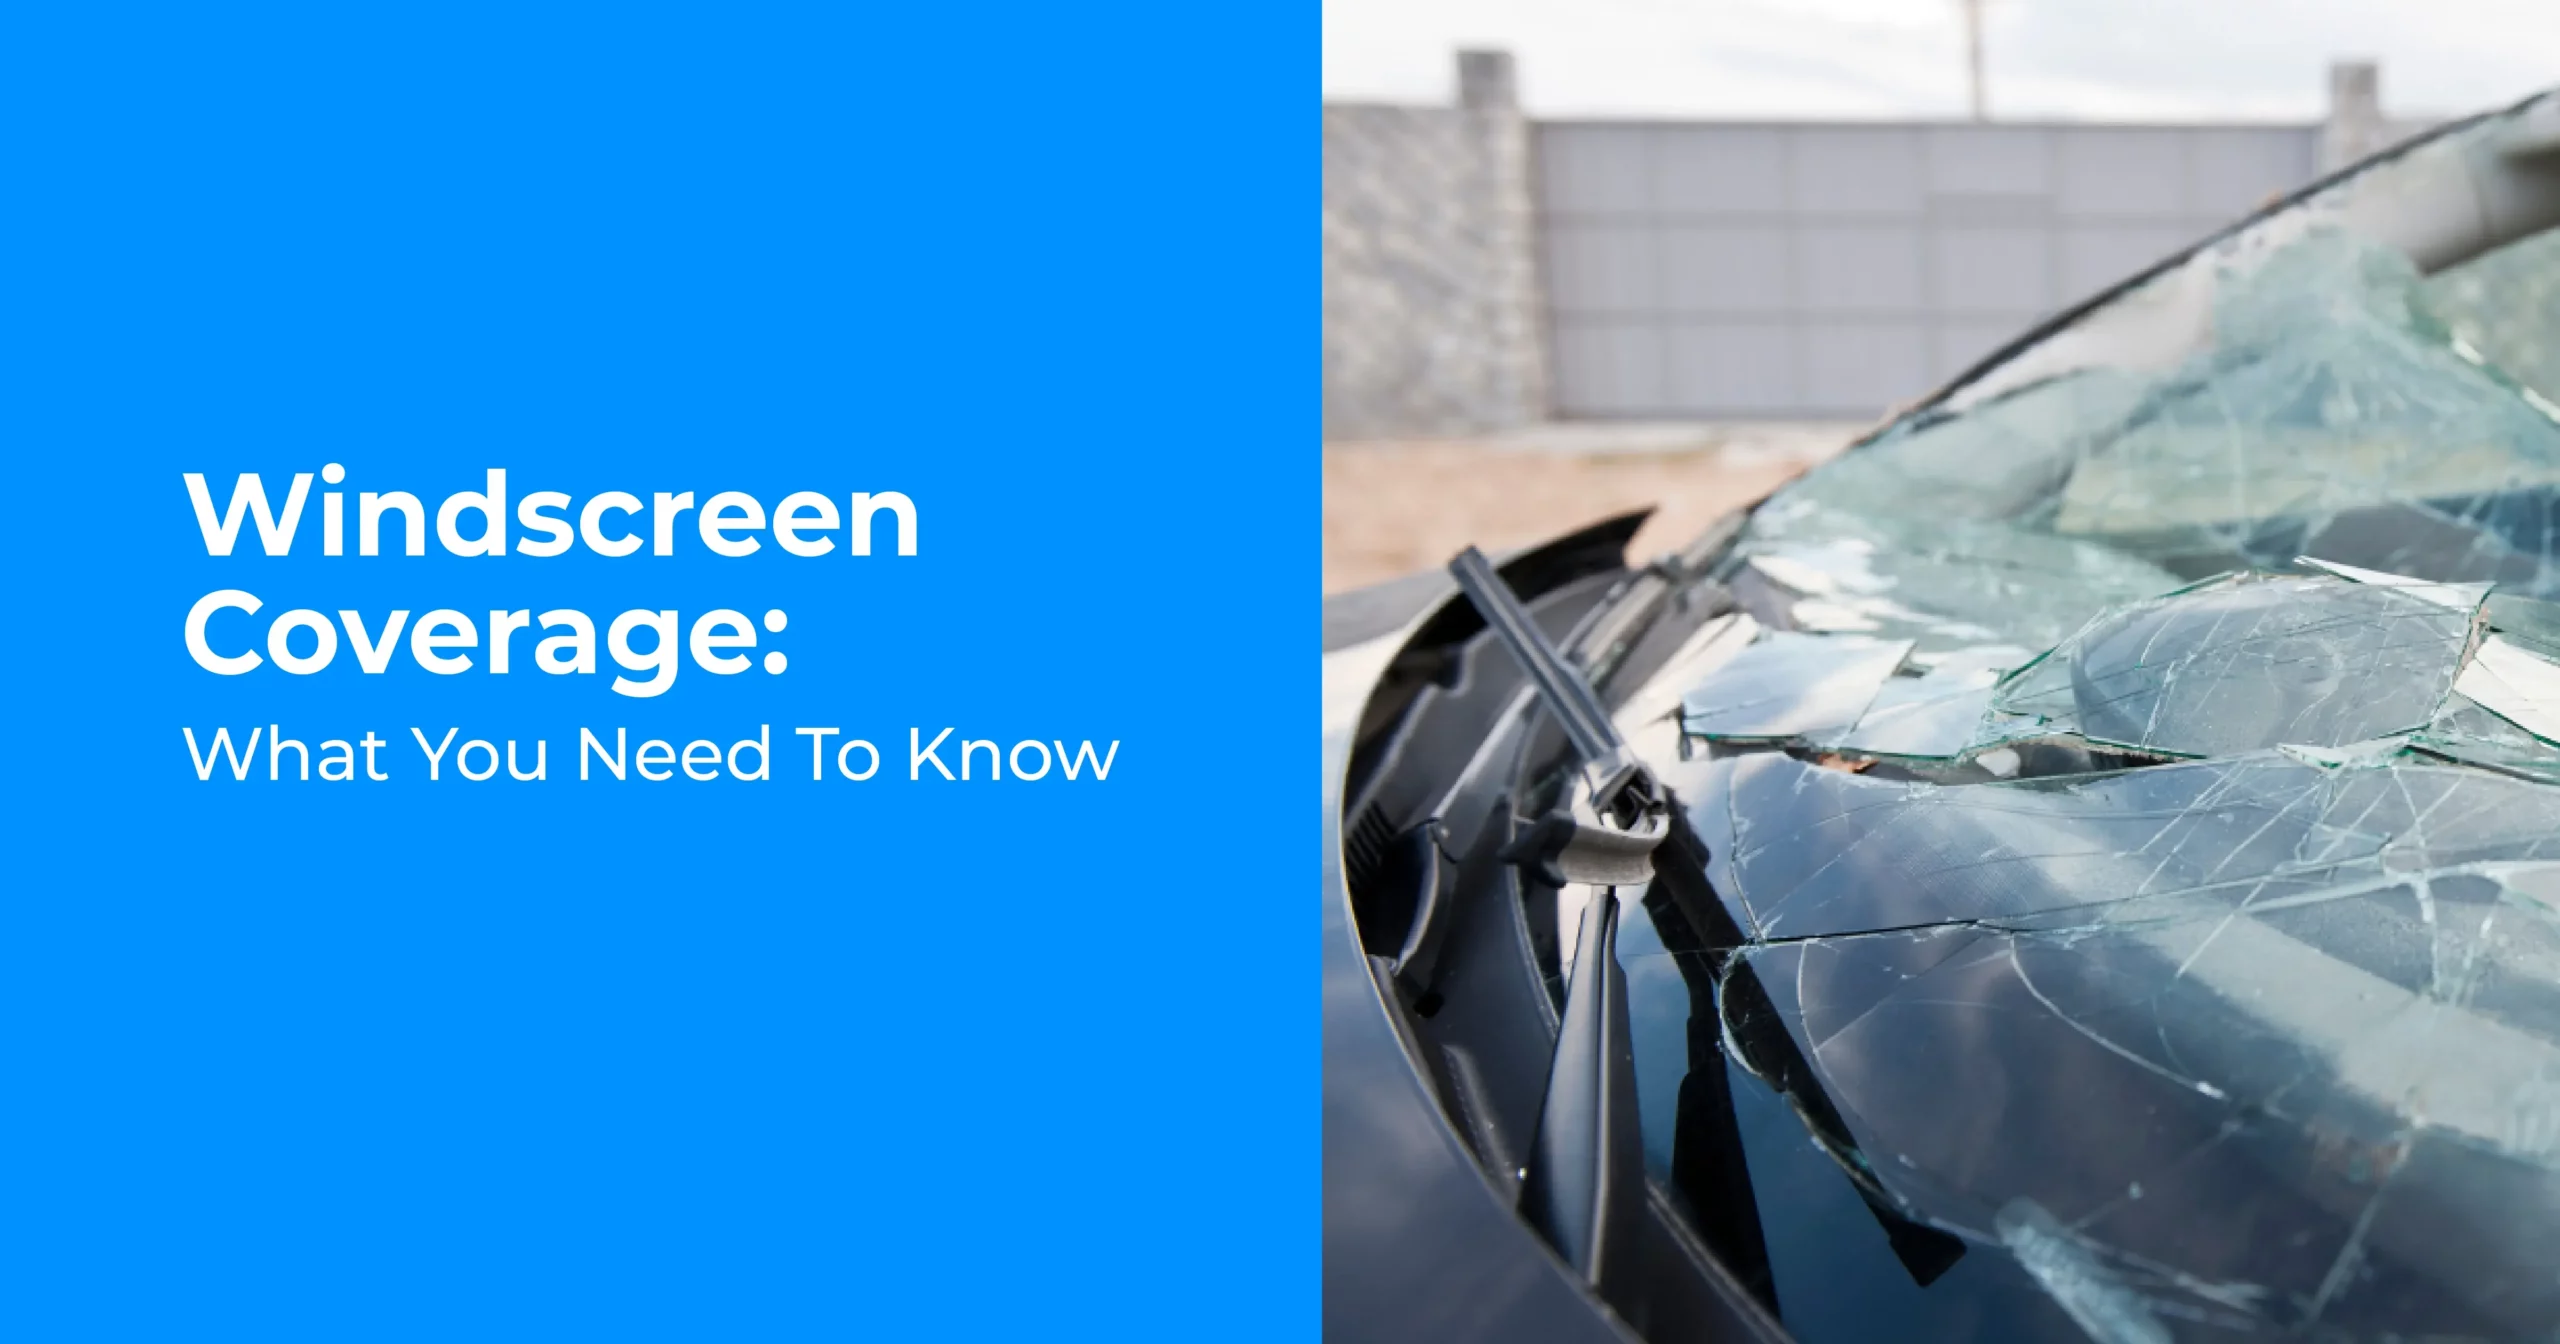 Windscreen Coverage: What You Need to Know